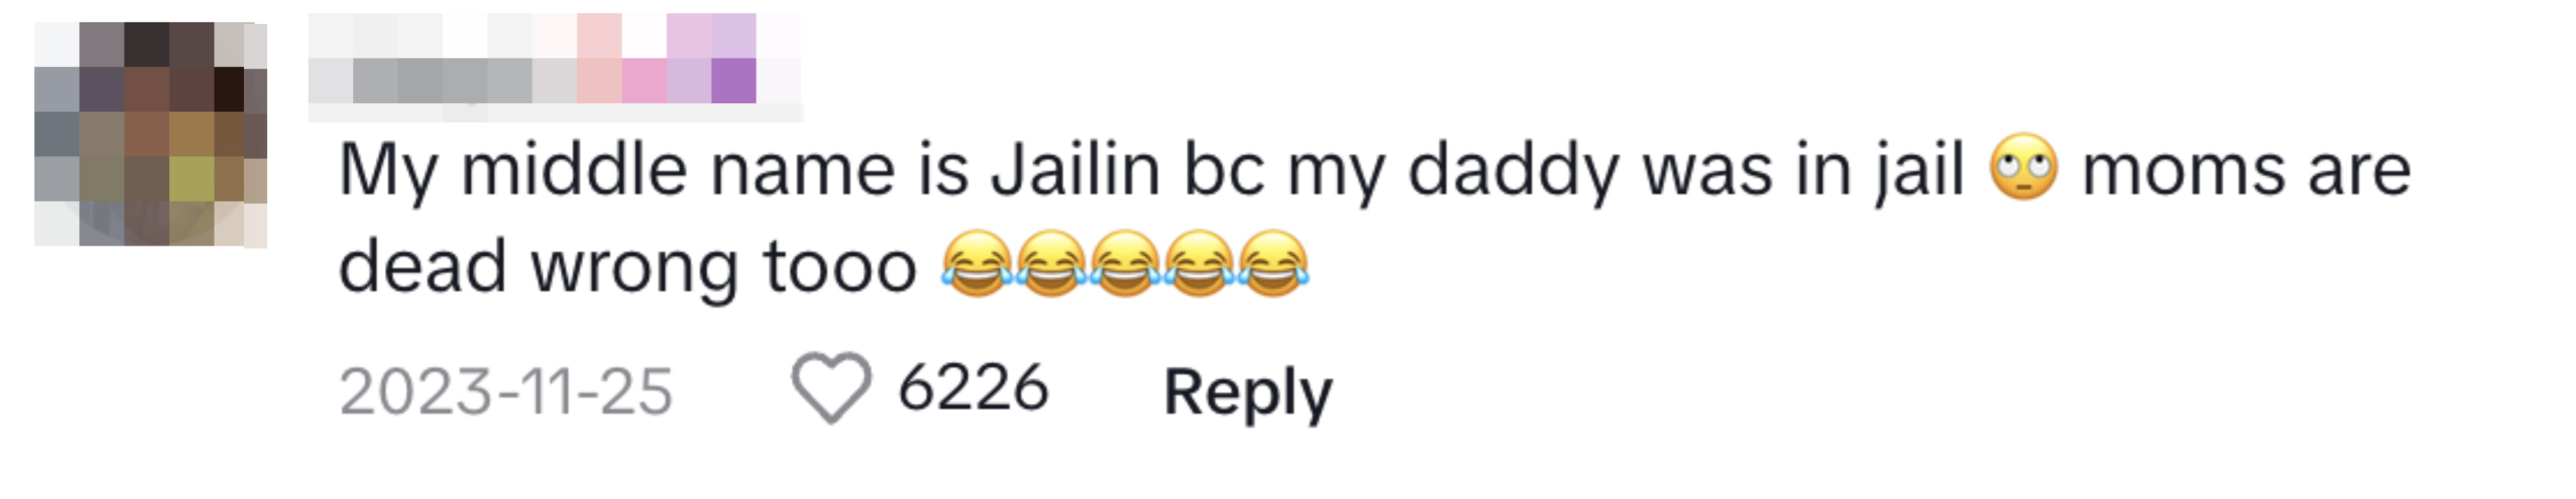 Comment: &quot;My middle name is Jailin bc my daddy was in jail. Moms are dead wrong too&quot;